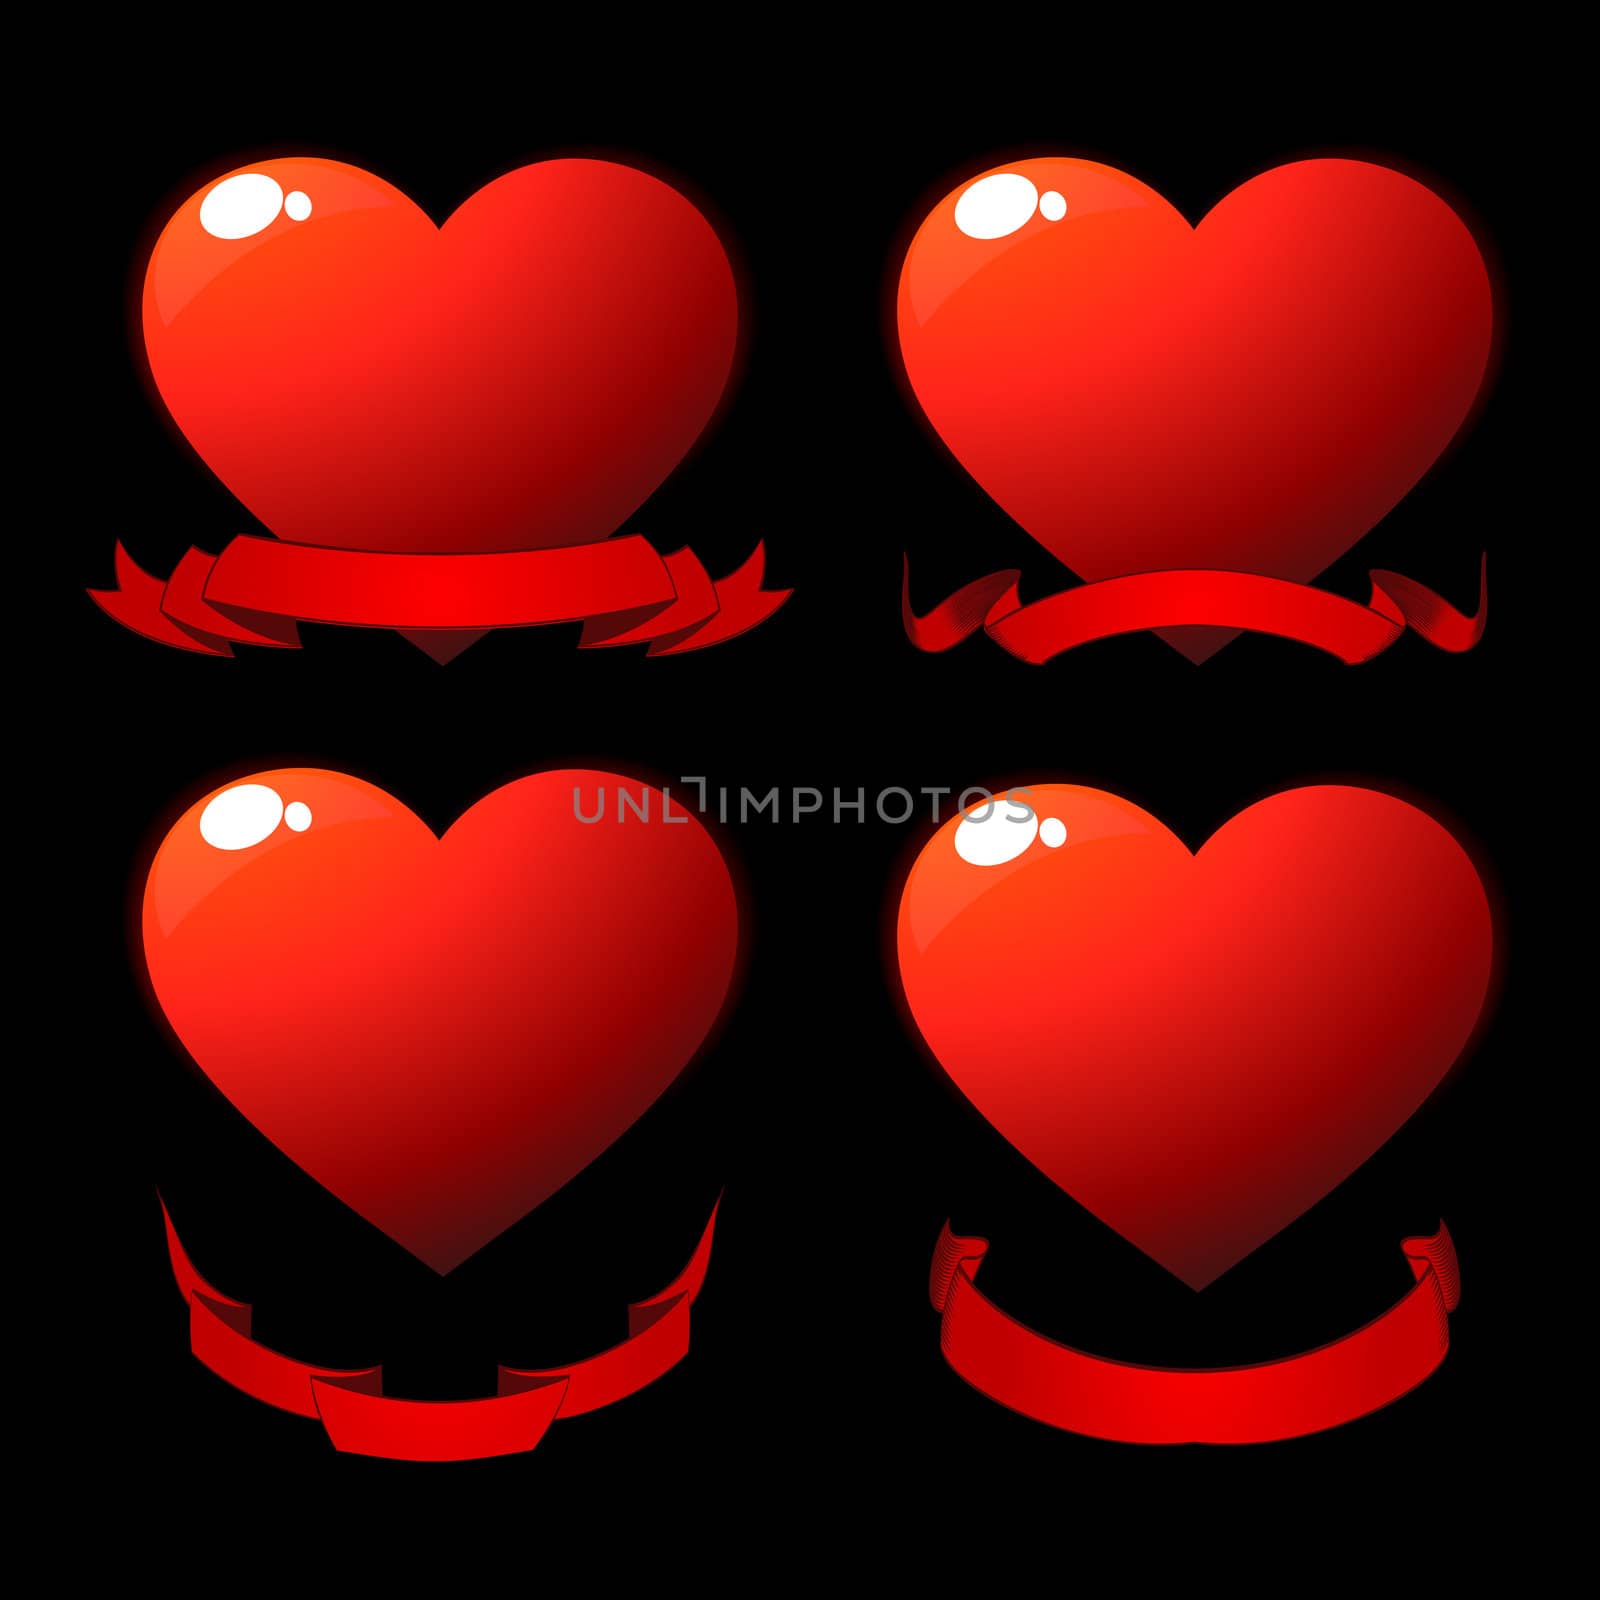 Red shiny hearts by Lirch